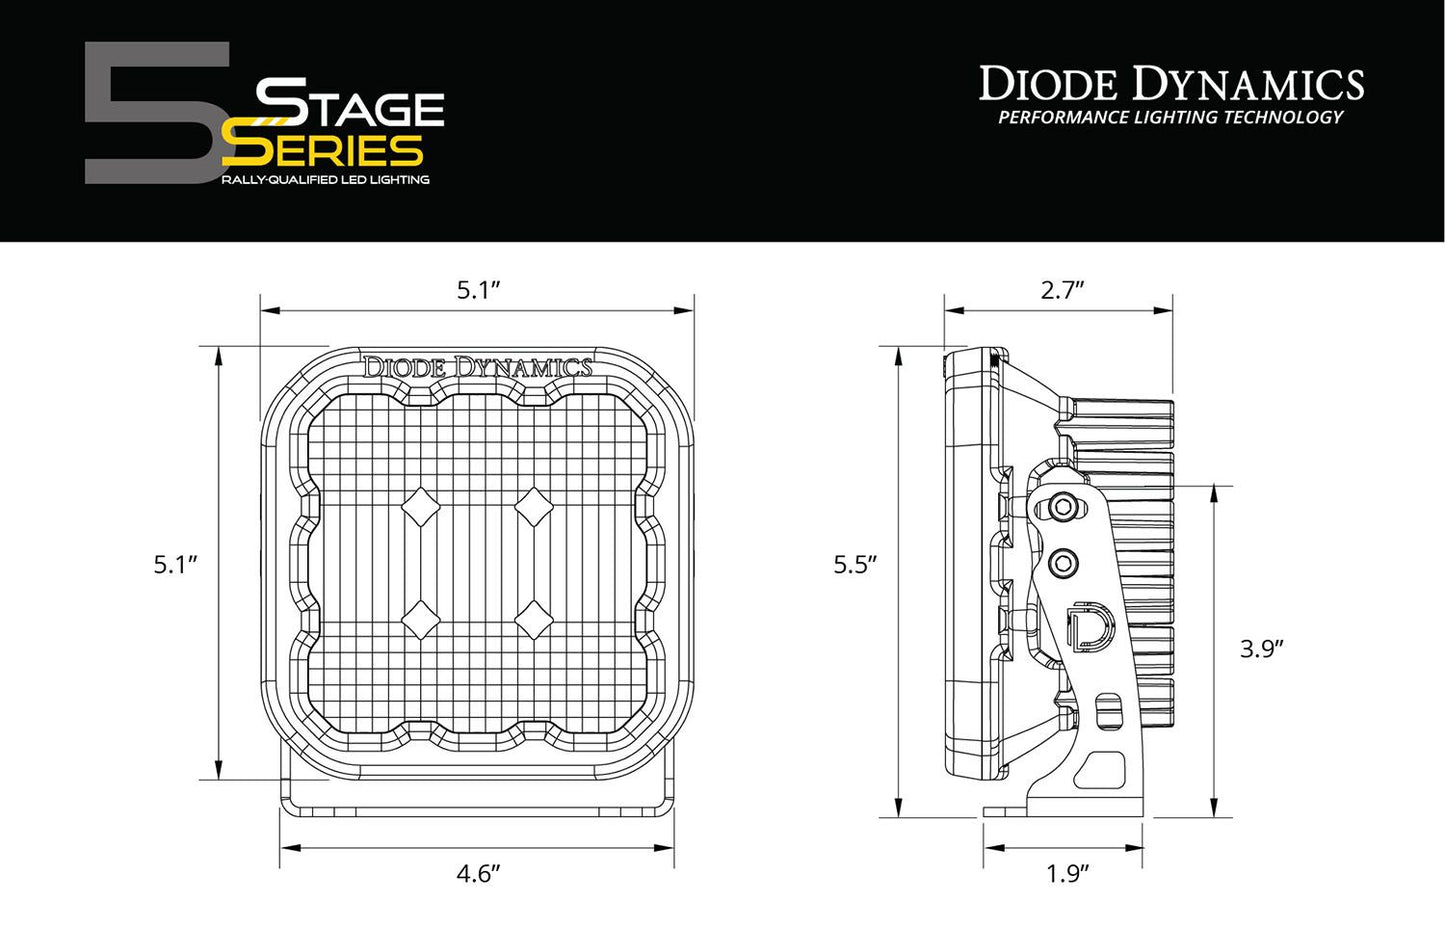 Diode Dynamics - Stage Series 5" Amber LED Pod